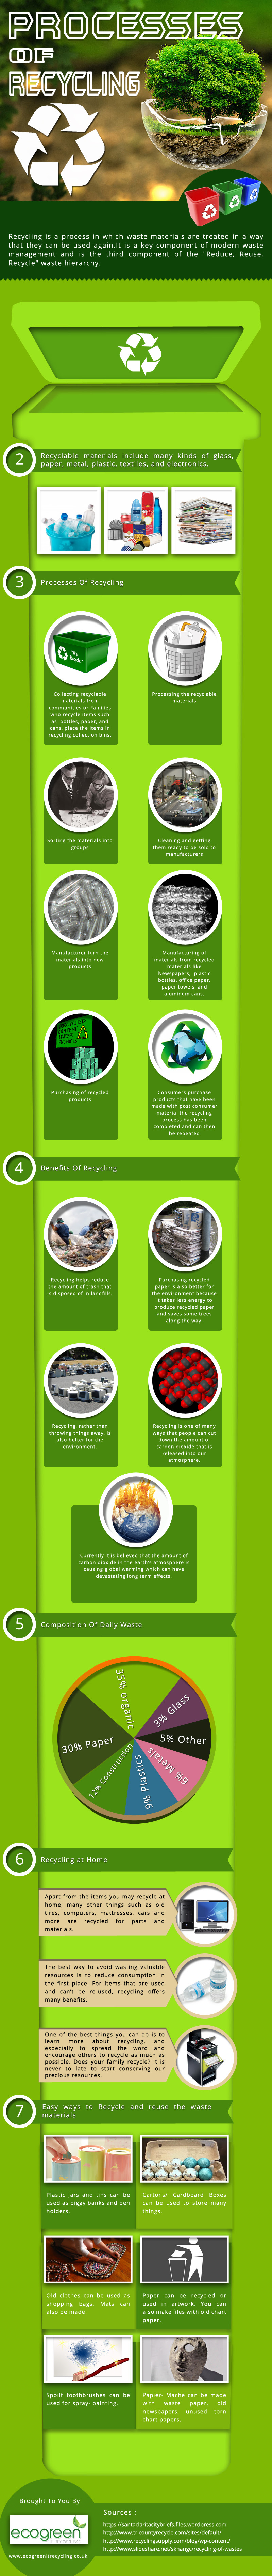 Processes of recyling